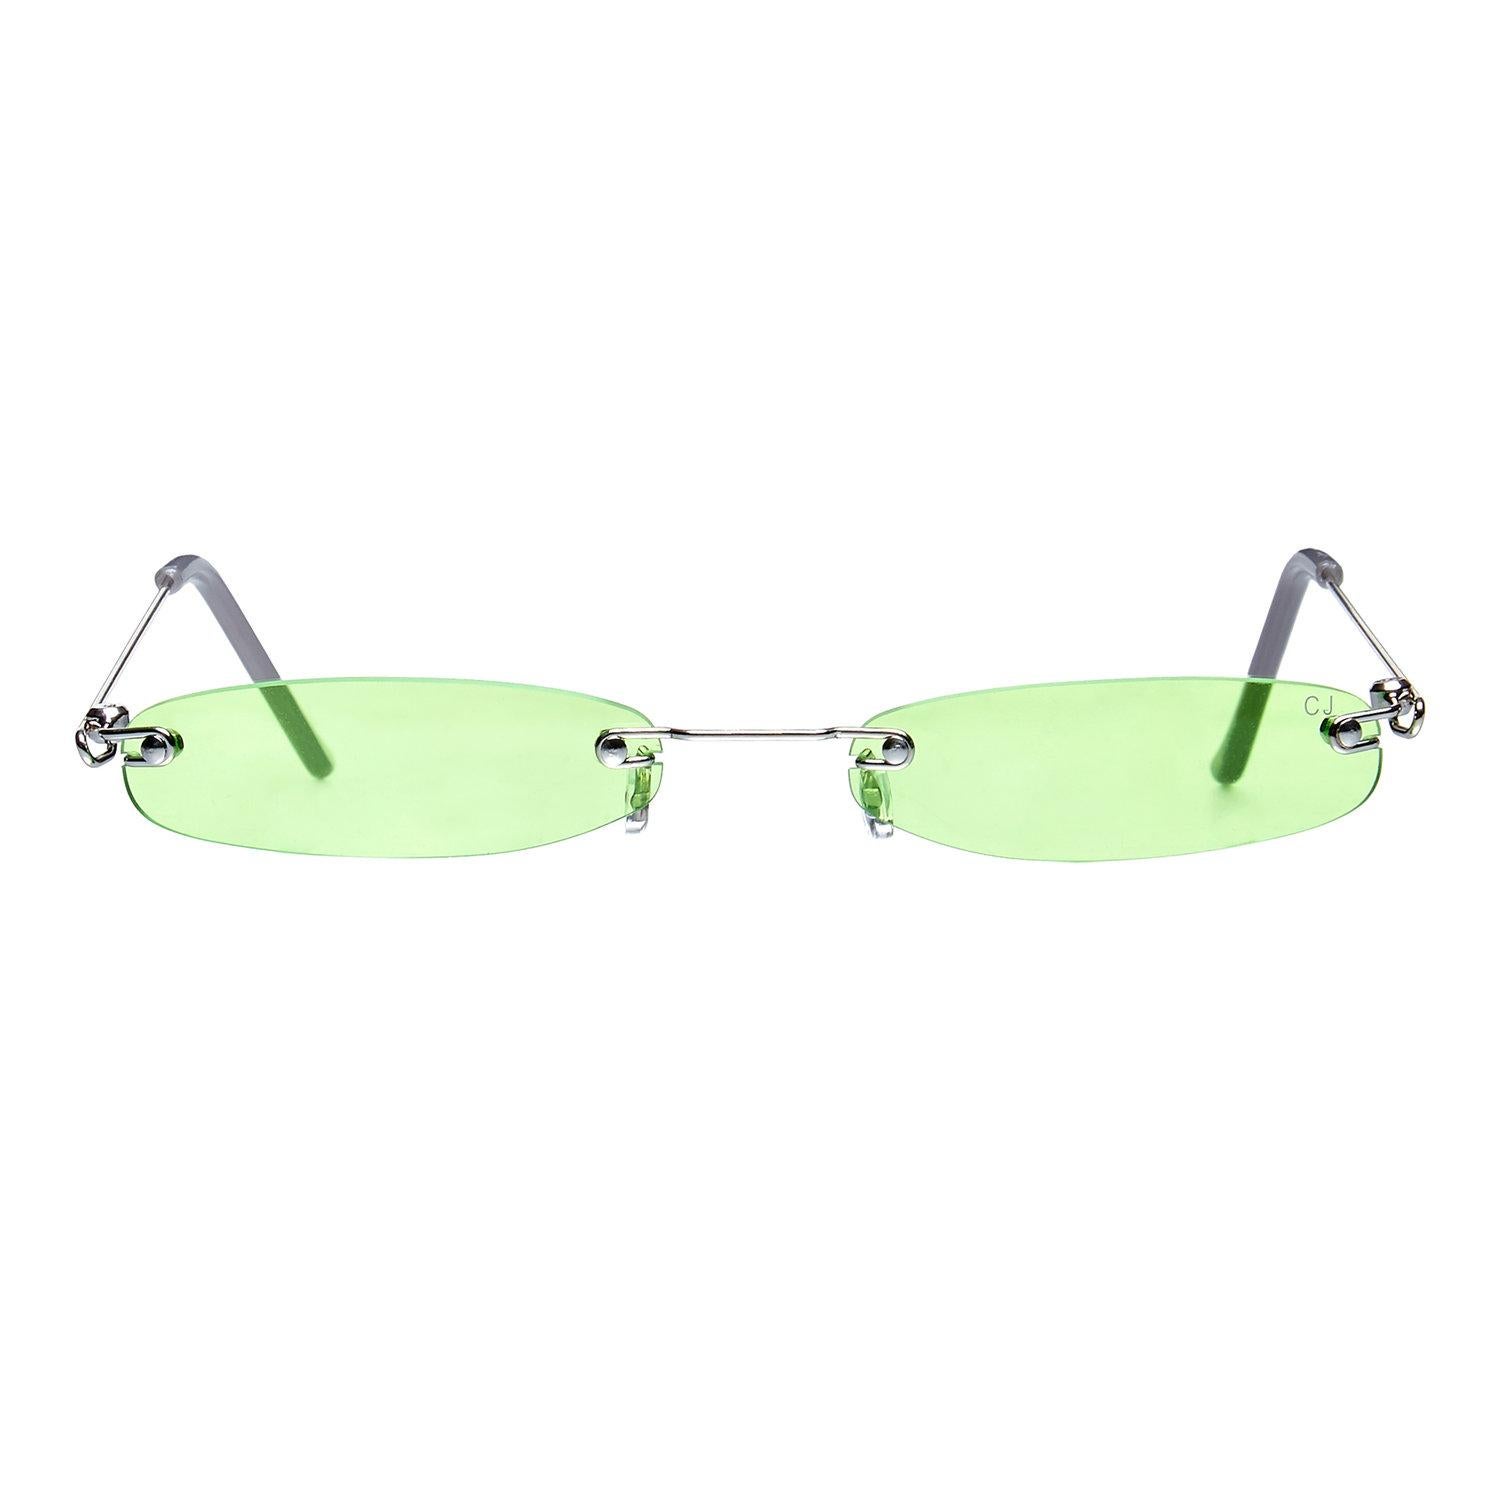 THE SHADY by CHRISTIANAHJONES in LIME GREEN.

Our iconic MOOD super narrow fashun sunnies that sit on the tip of your nose. low UV protection and comes with the new CHRISTIANAHJONES package.